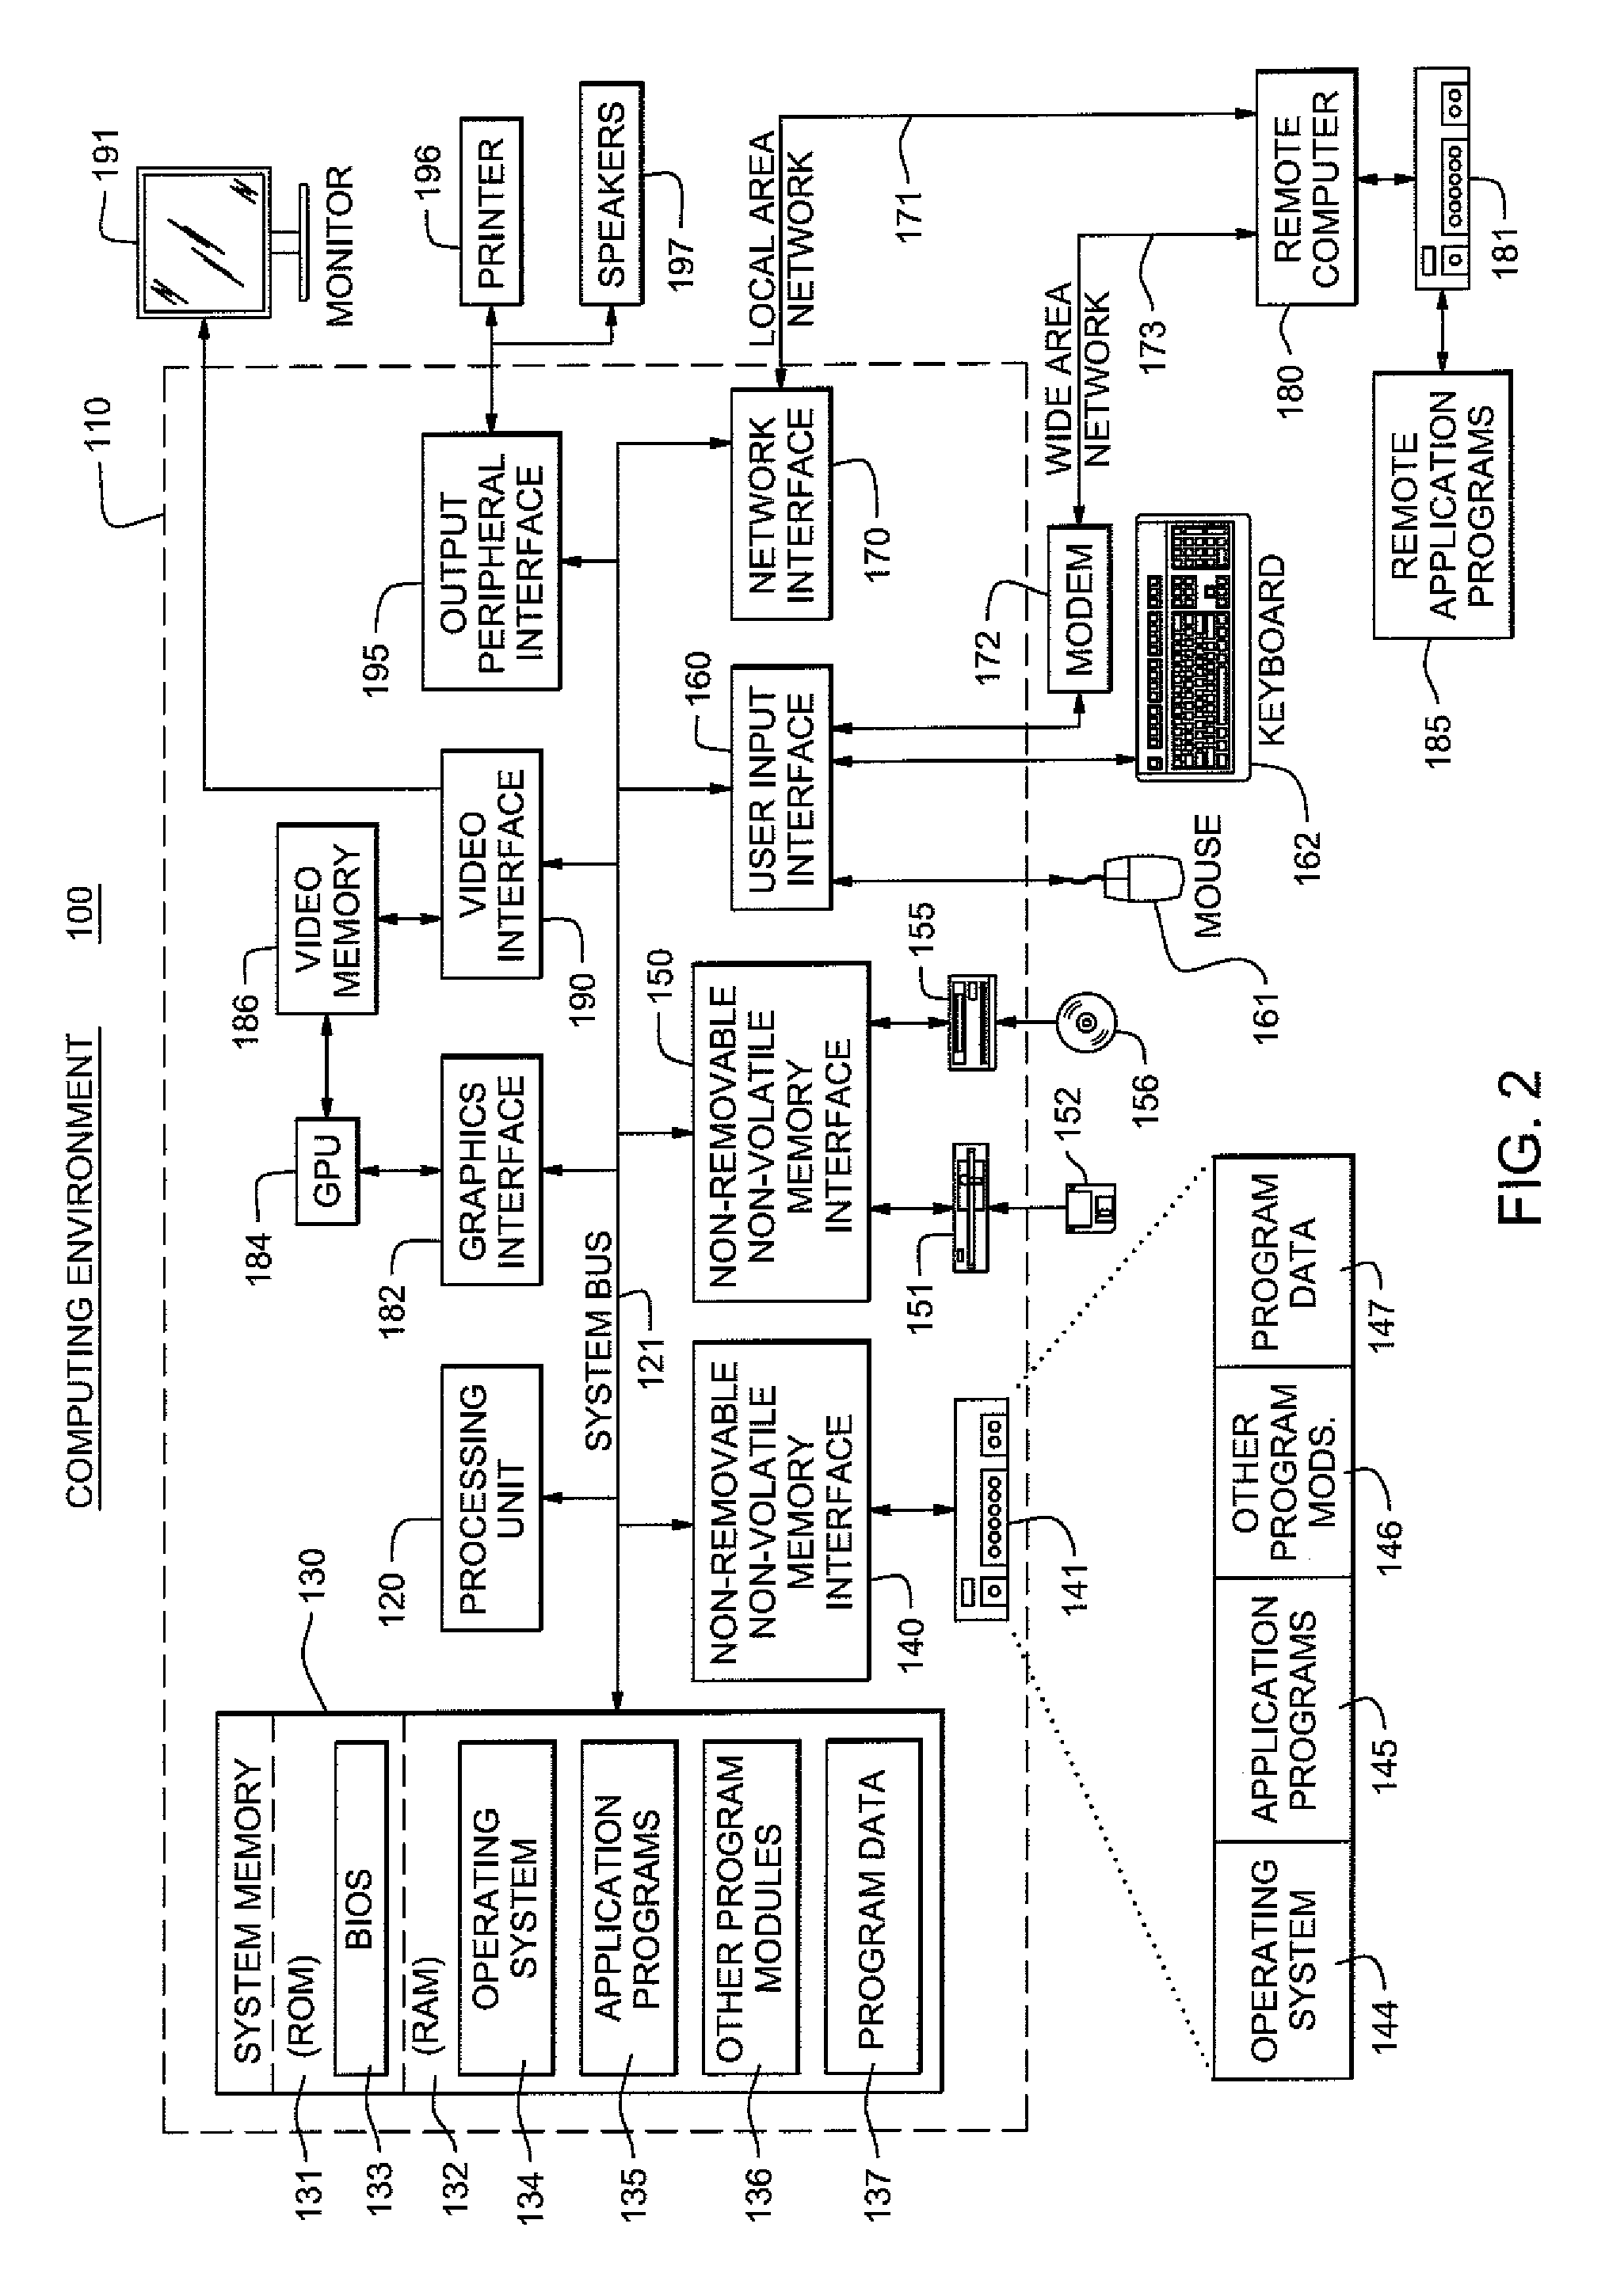 Method and system for allocating dependent tasks to teams through multi-variate optimization